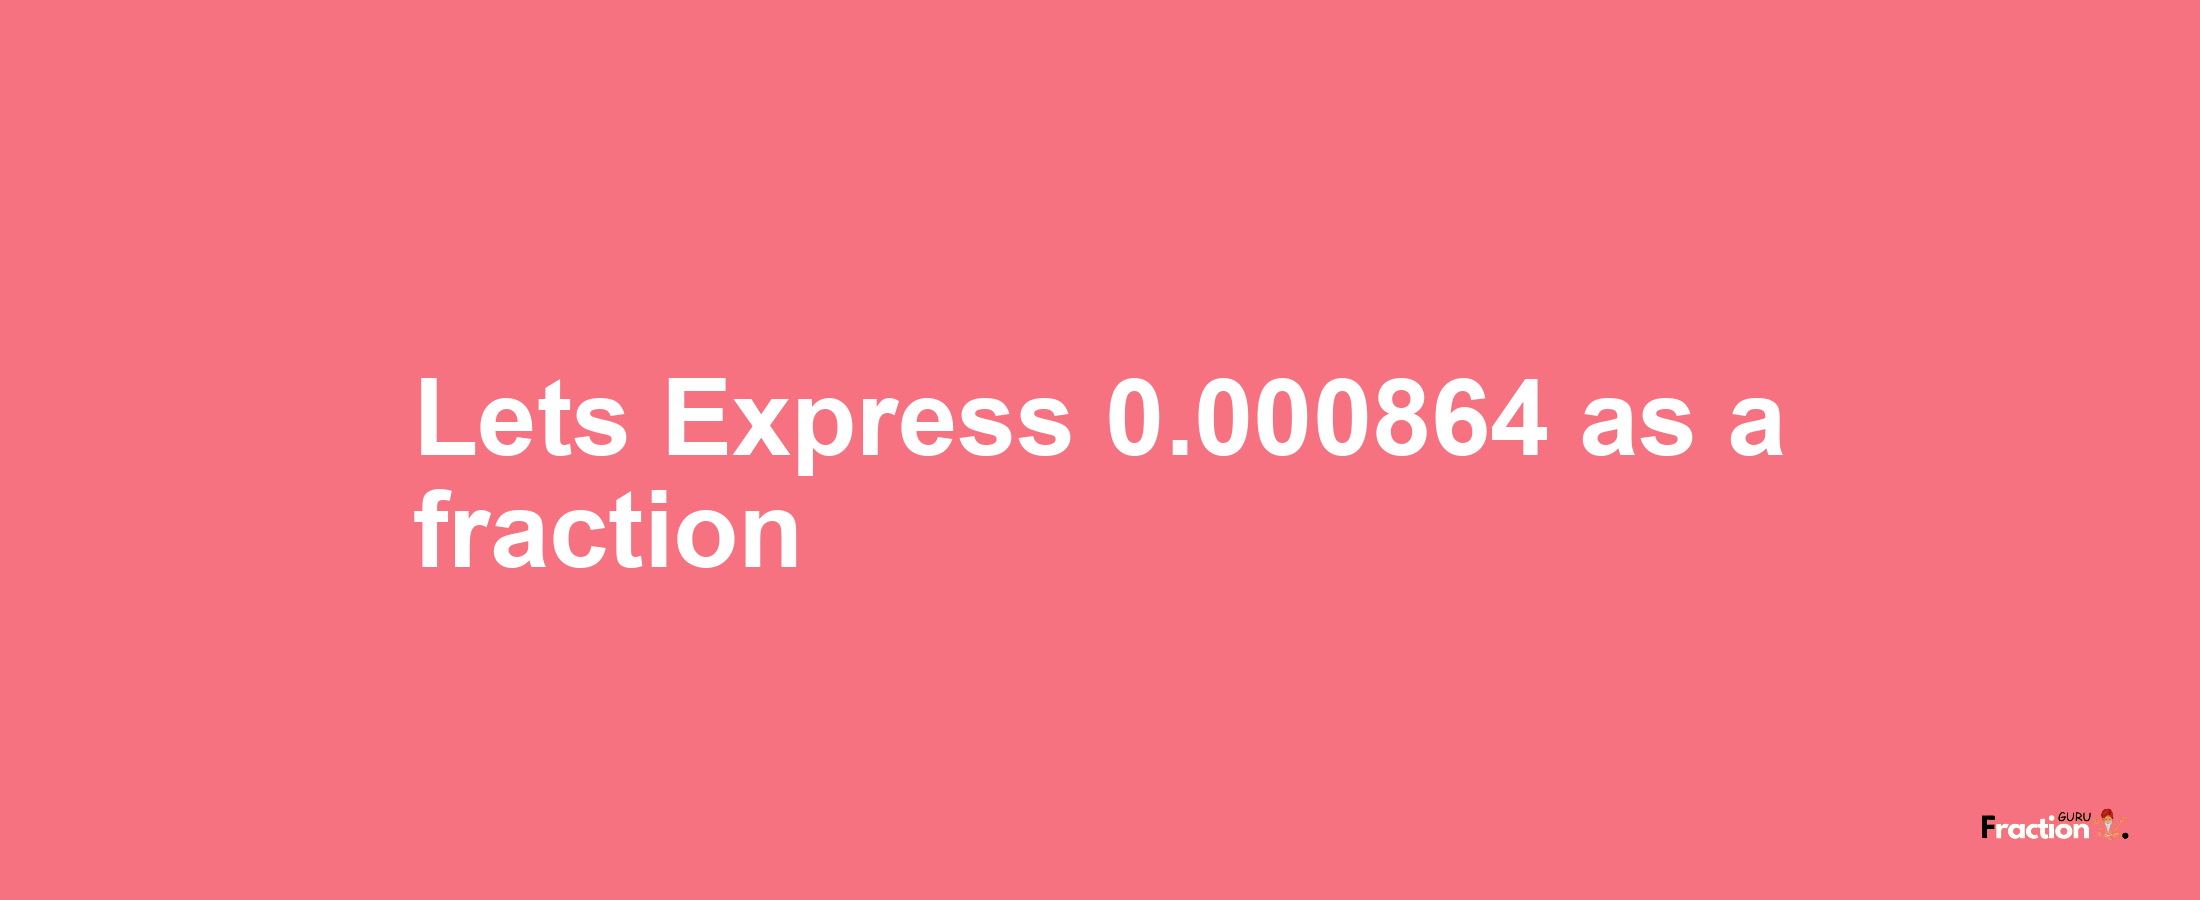 Lets Express 0.000864 as afraction